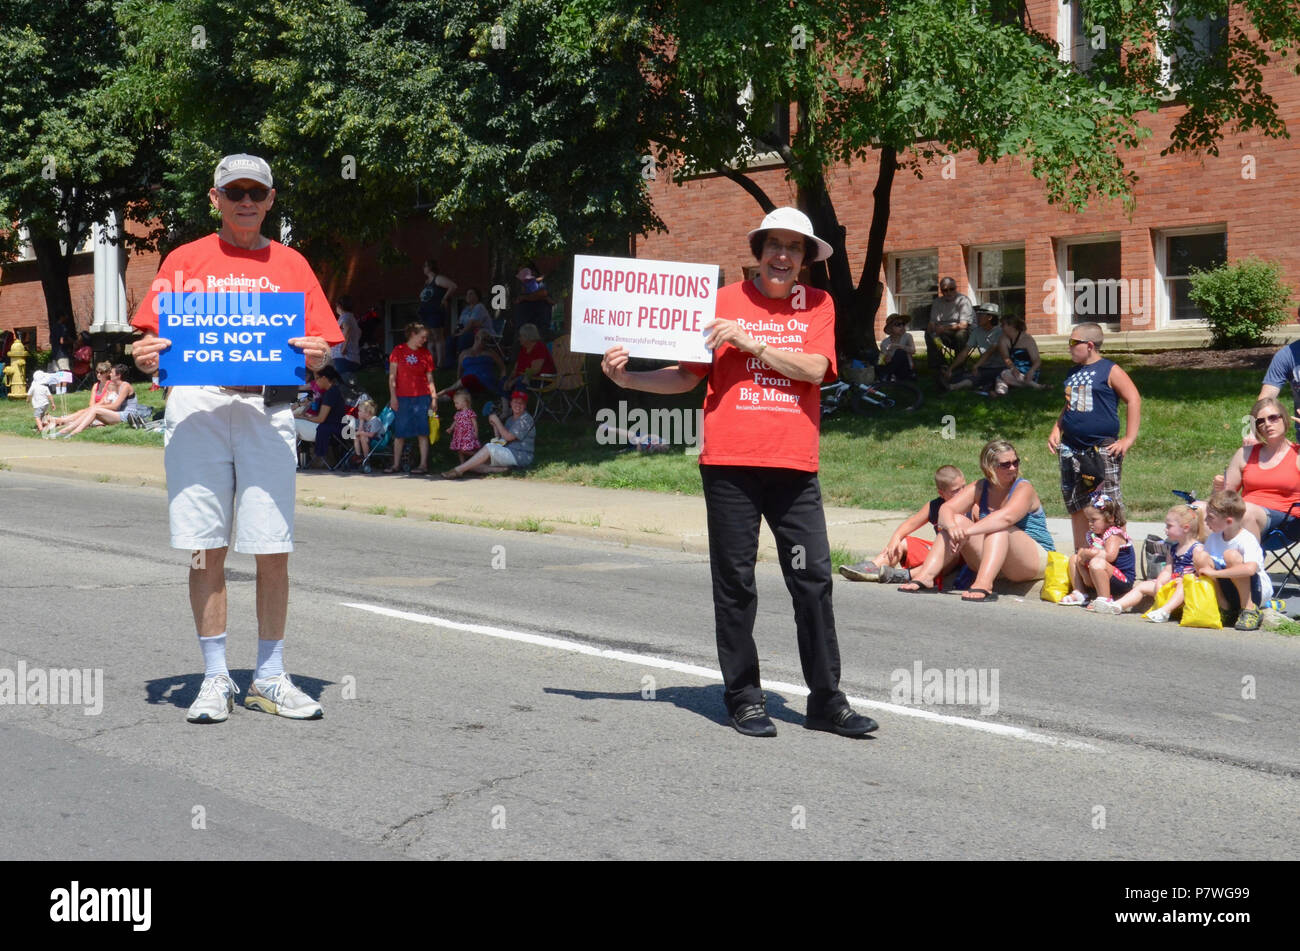 YPSILANTI, MI / USA - JULY 4, 2018:  Representatives of Reclaim Our American Democracy from Big Money march in the Ypsilanti Fourth of July parade. Stock Photo